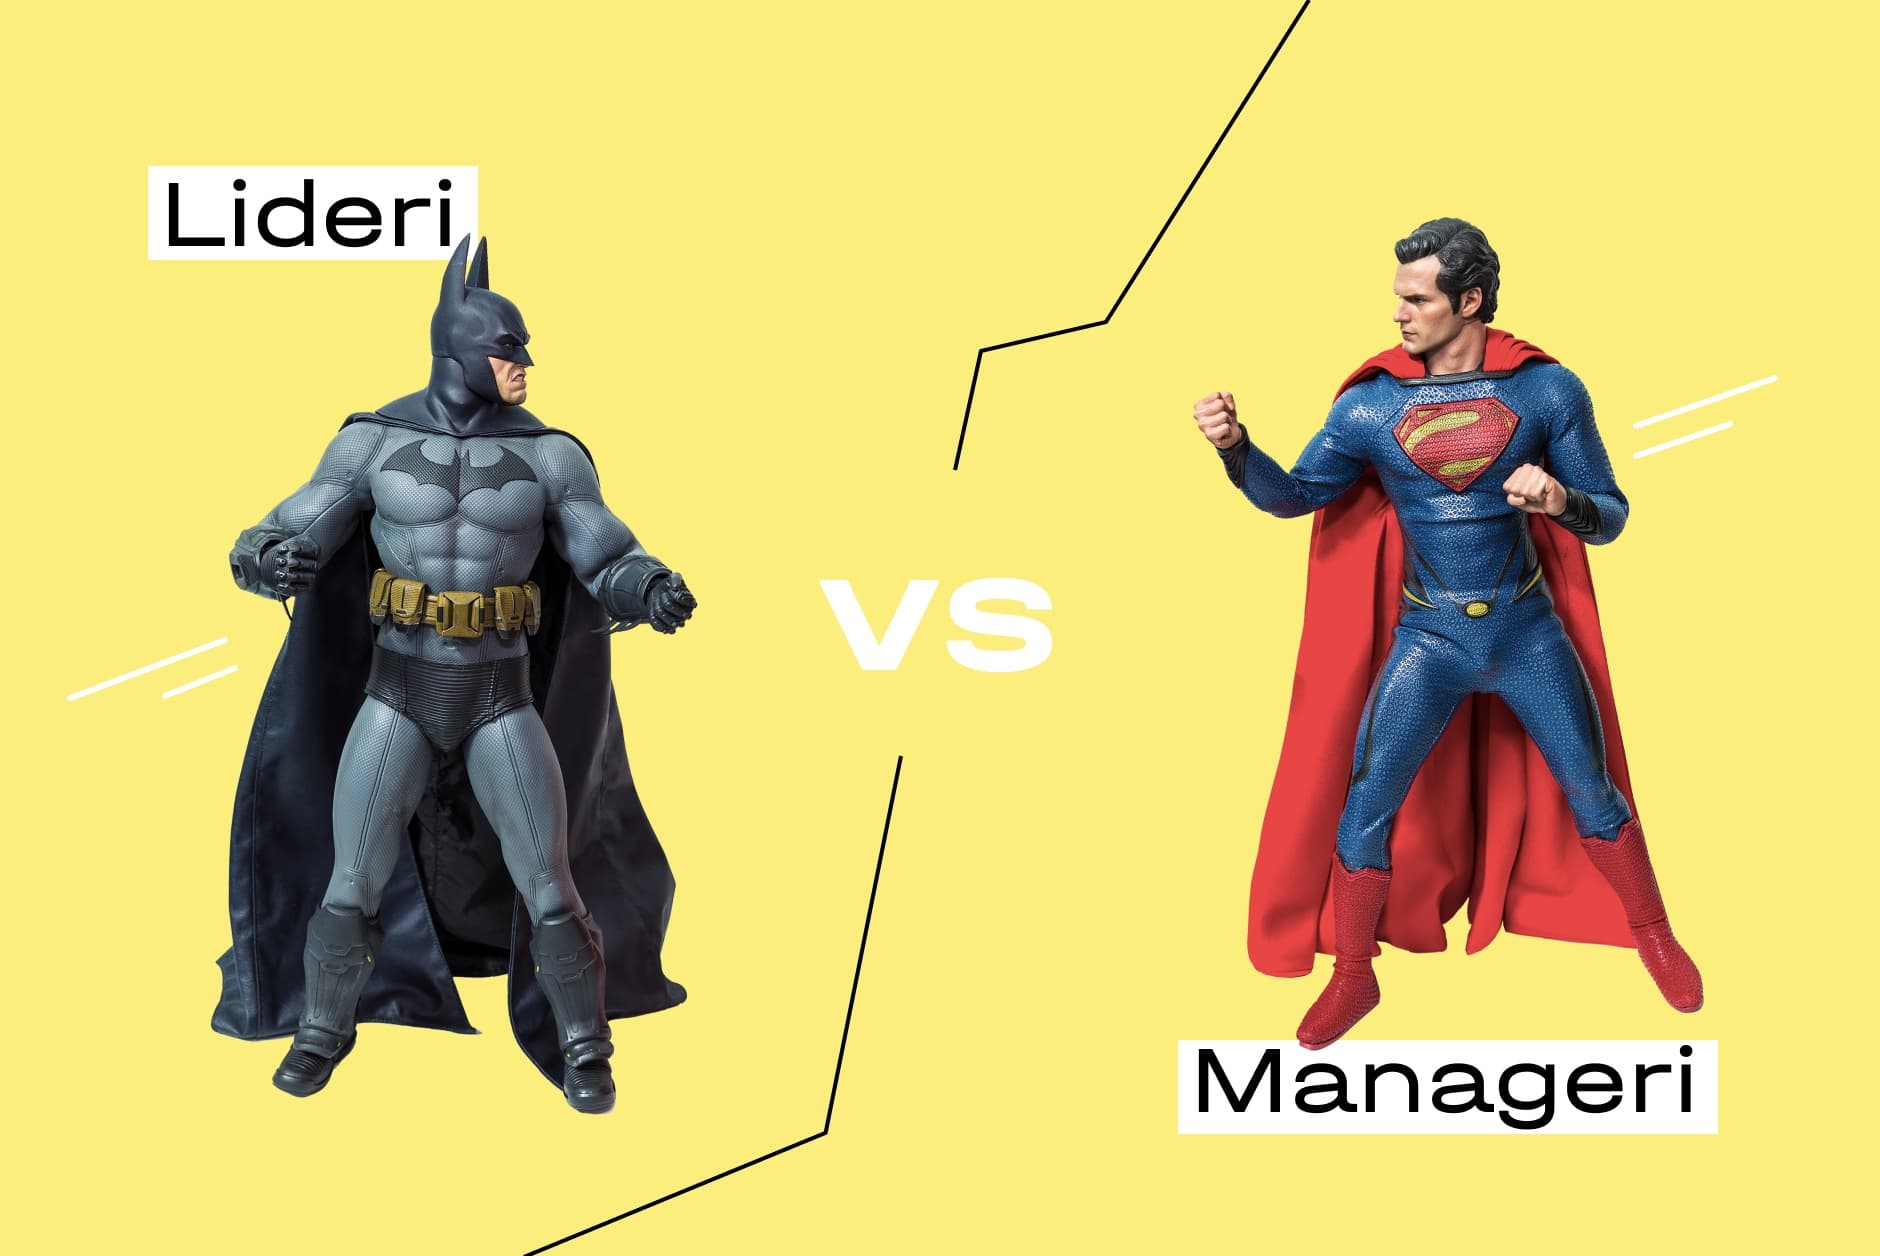 leaders-vs-managers-preview-62ff999213d49080237082-min-64119db0e9c28800026285.jpg